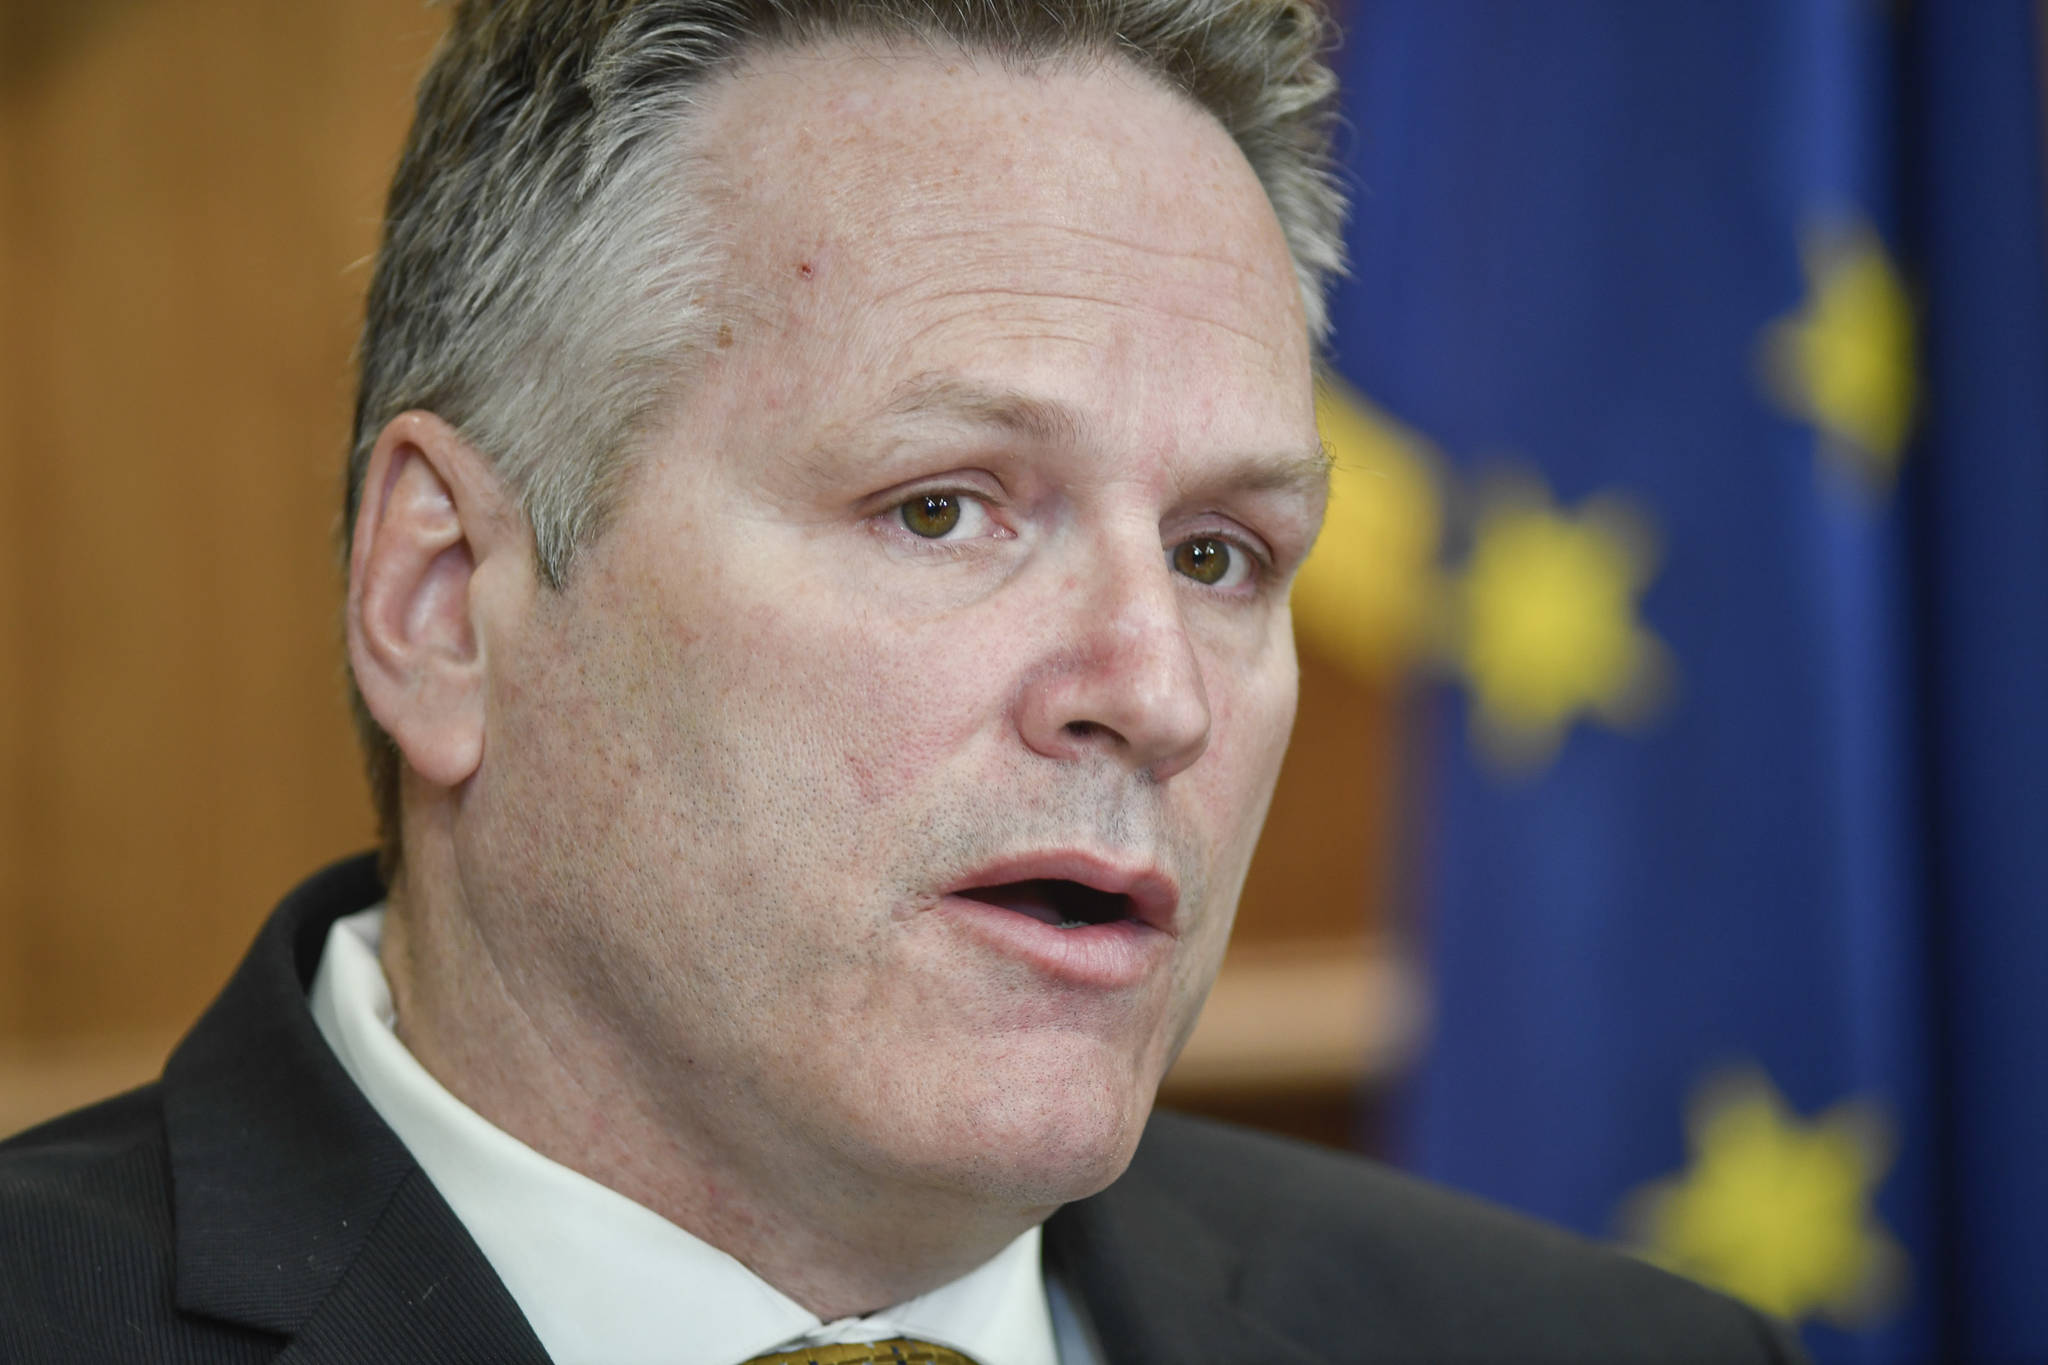 Gov. Mike Dunleavy holds a press conference at the Capitol on Tuesday, April 9, 2019. (Michael Penn | Juneau Empire)